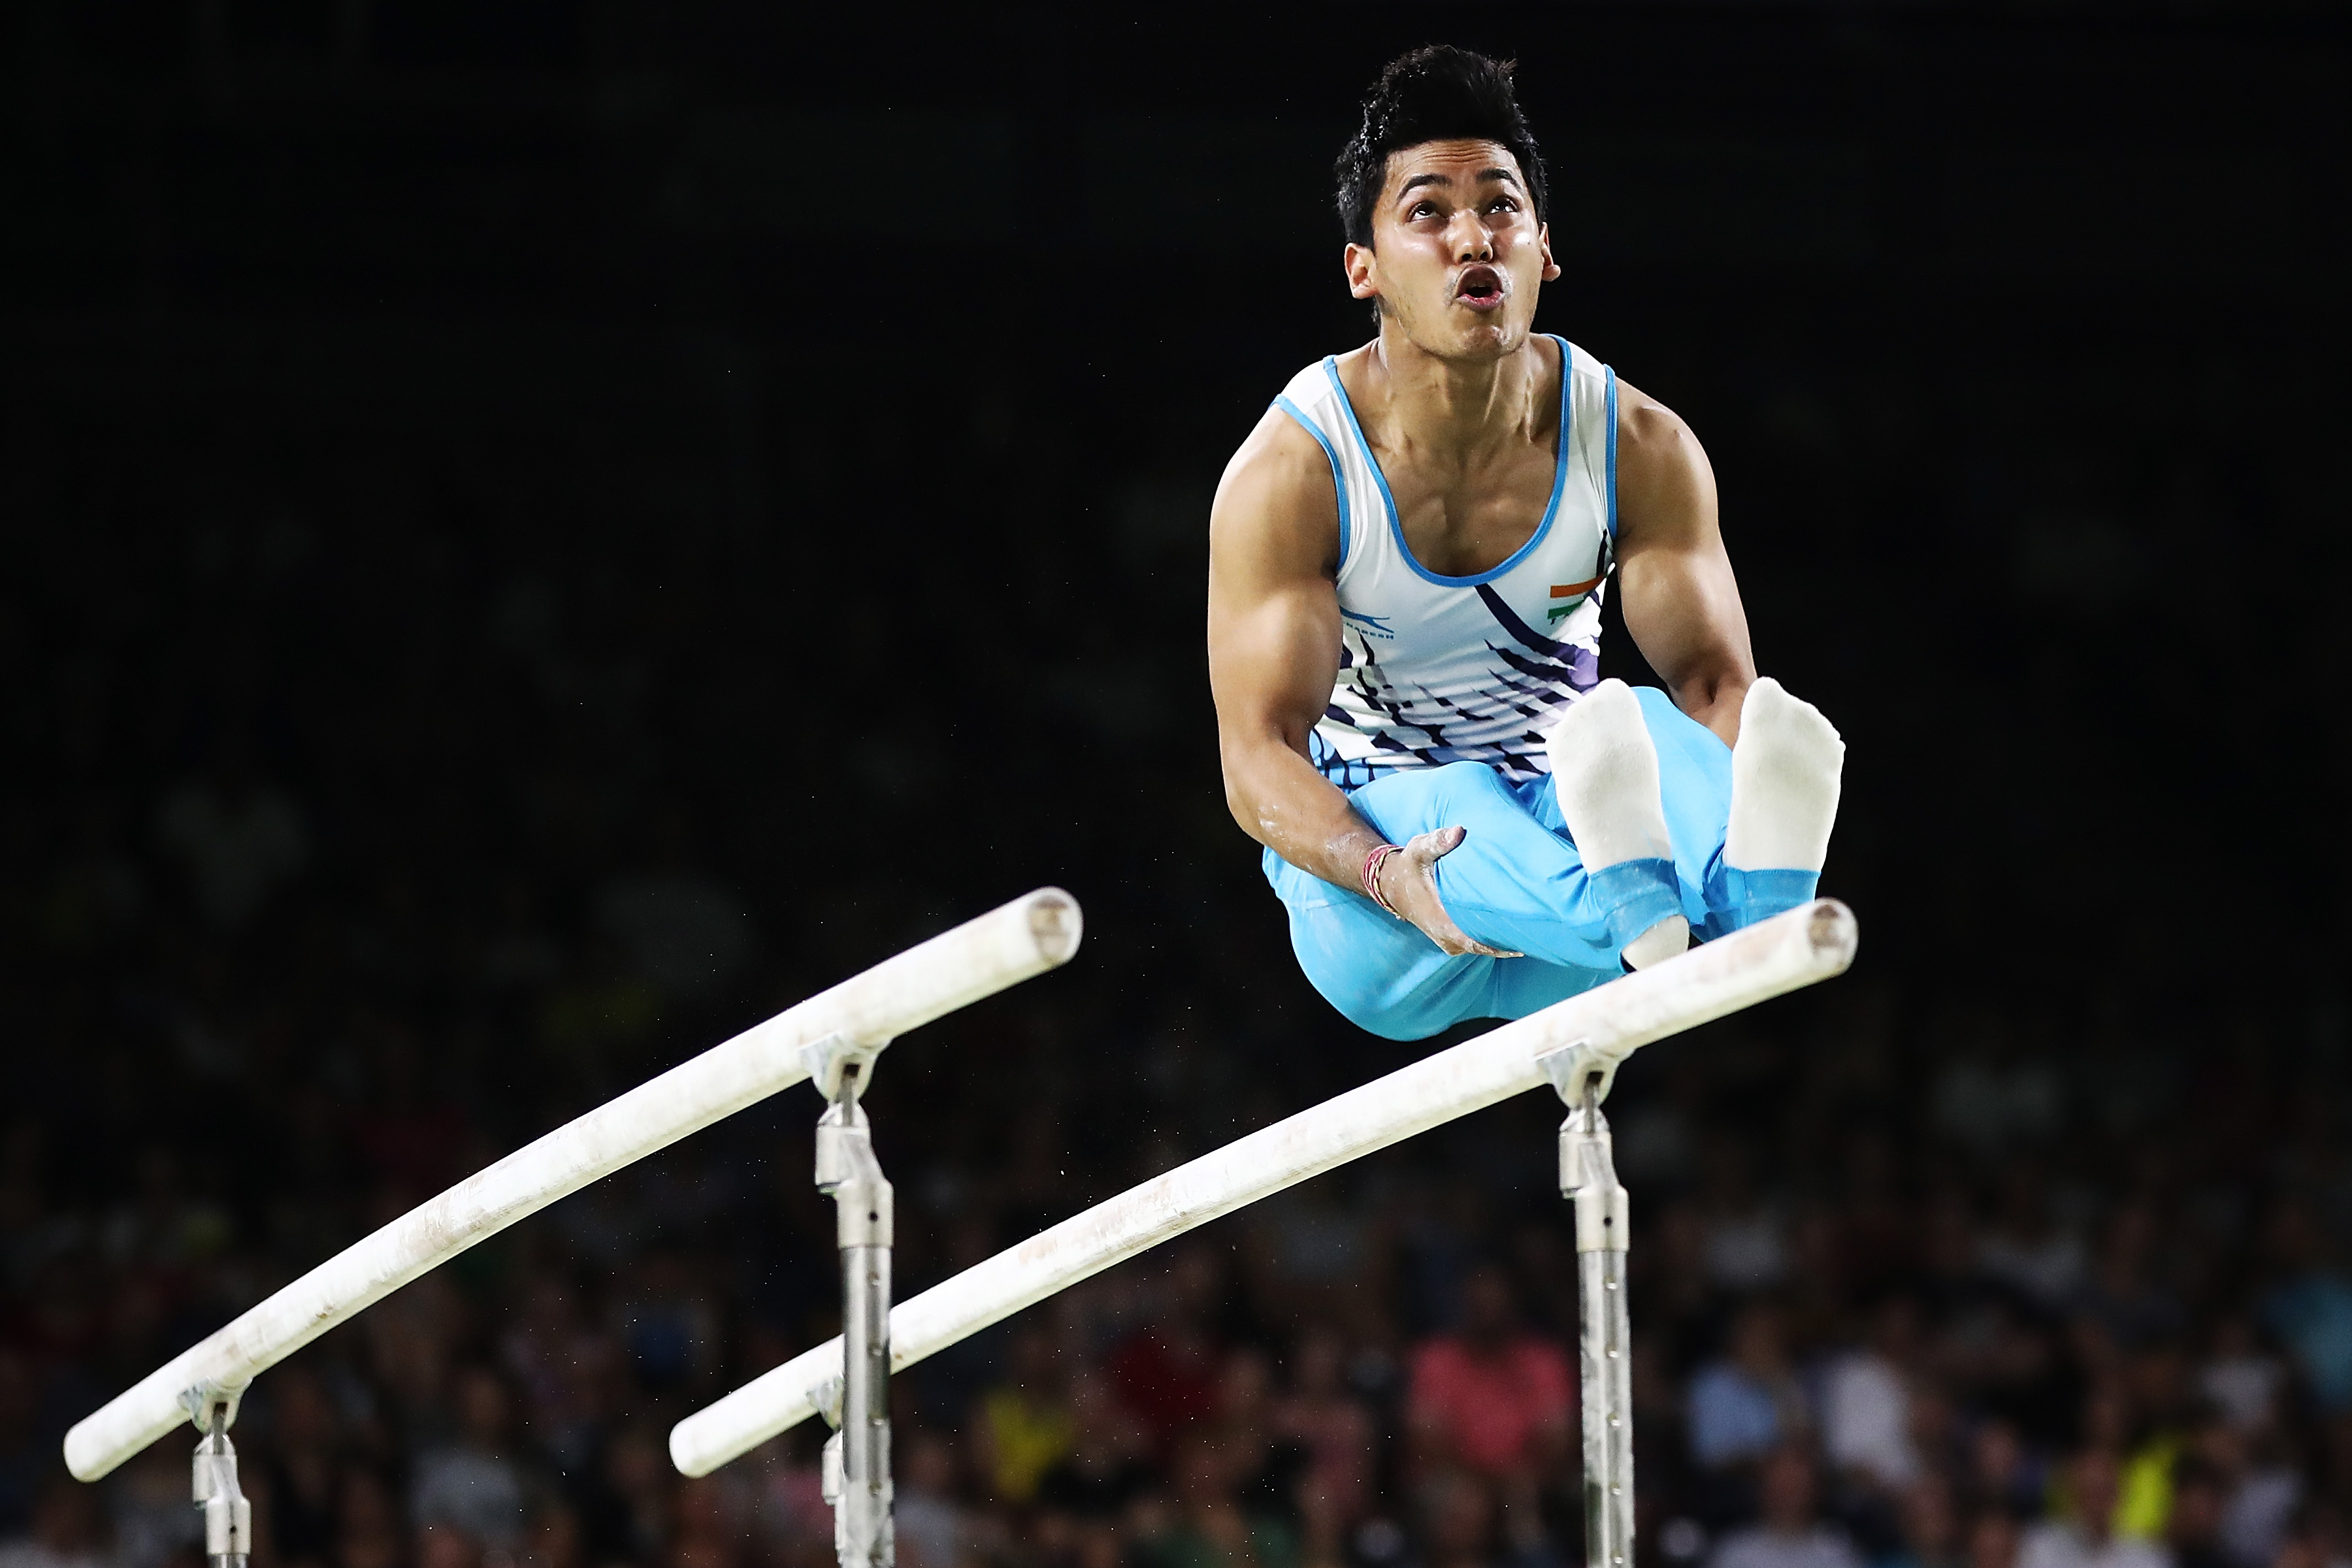 Indian men disappoint at World Artistic Gymnastics Championships in Germany